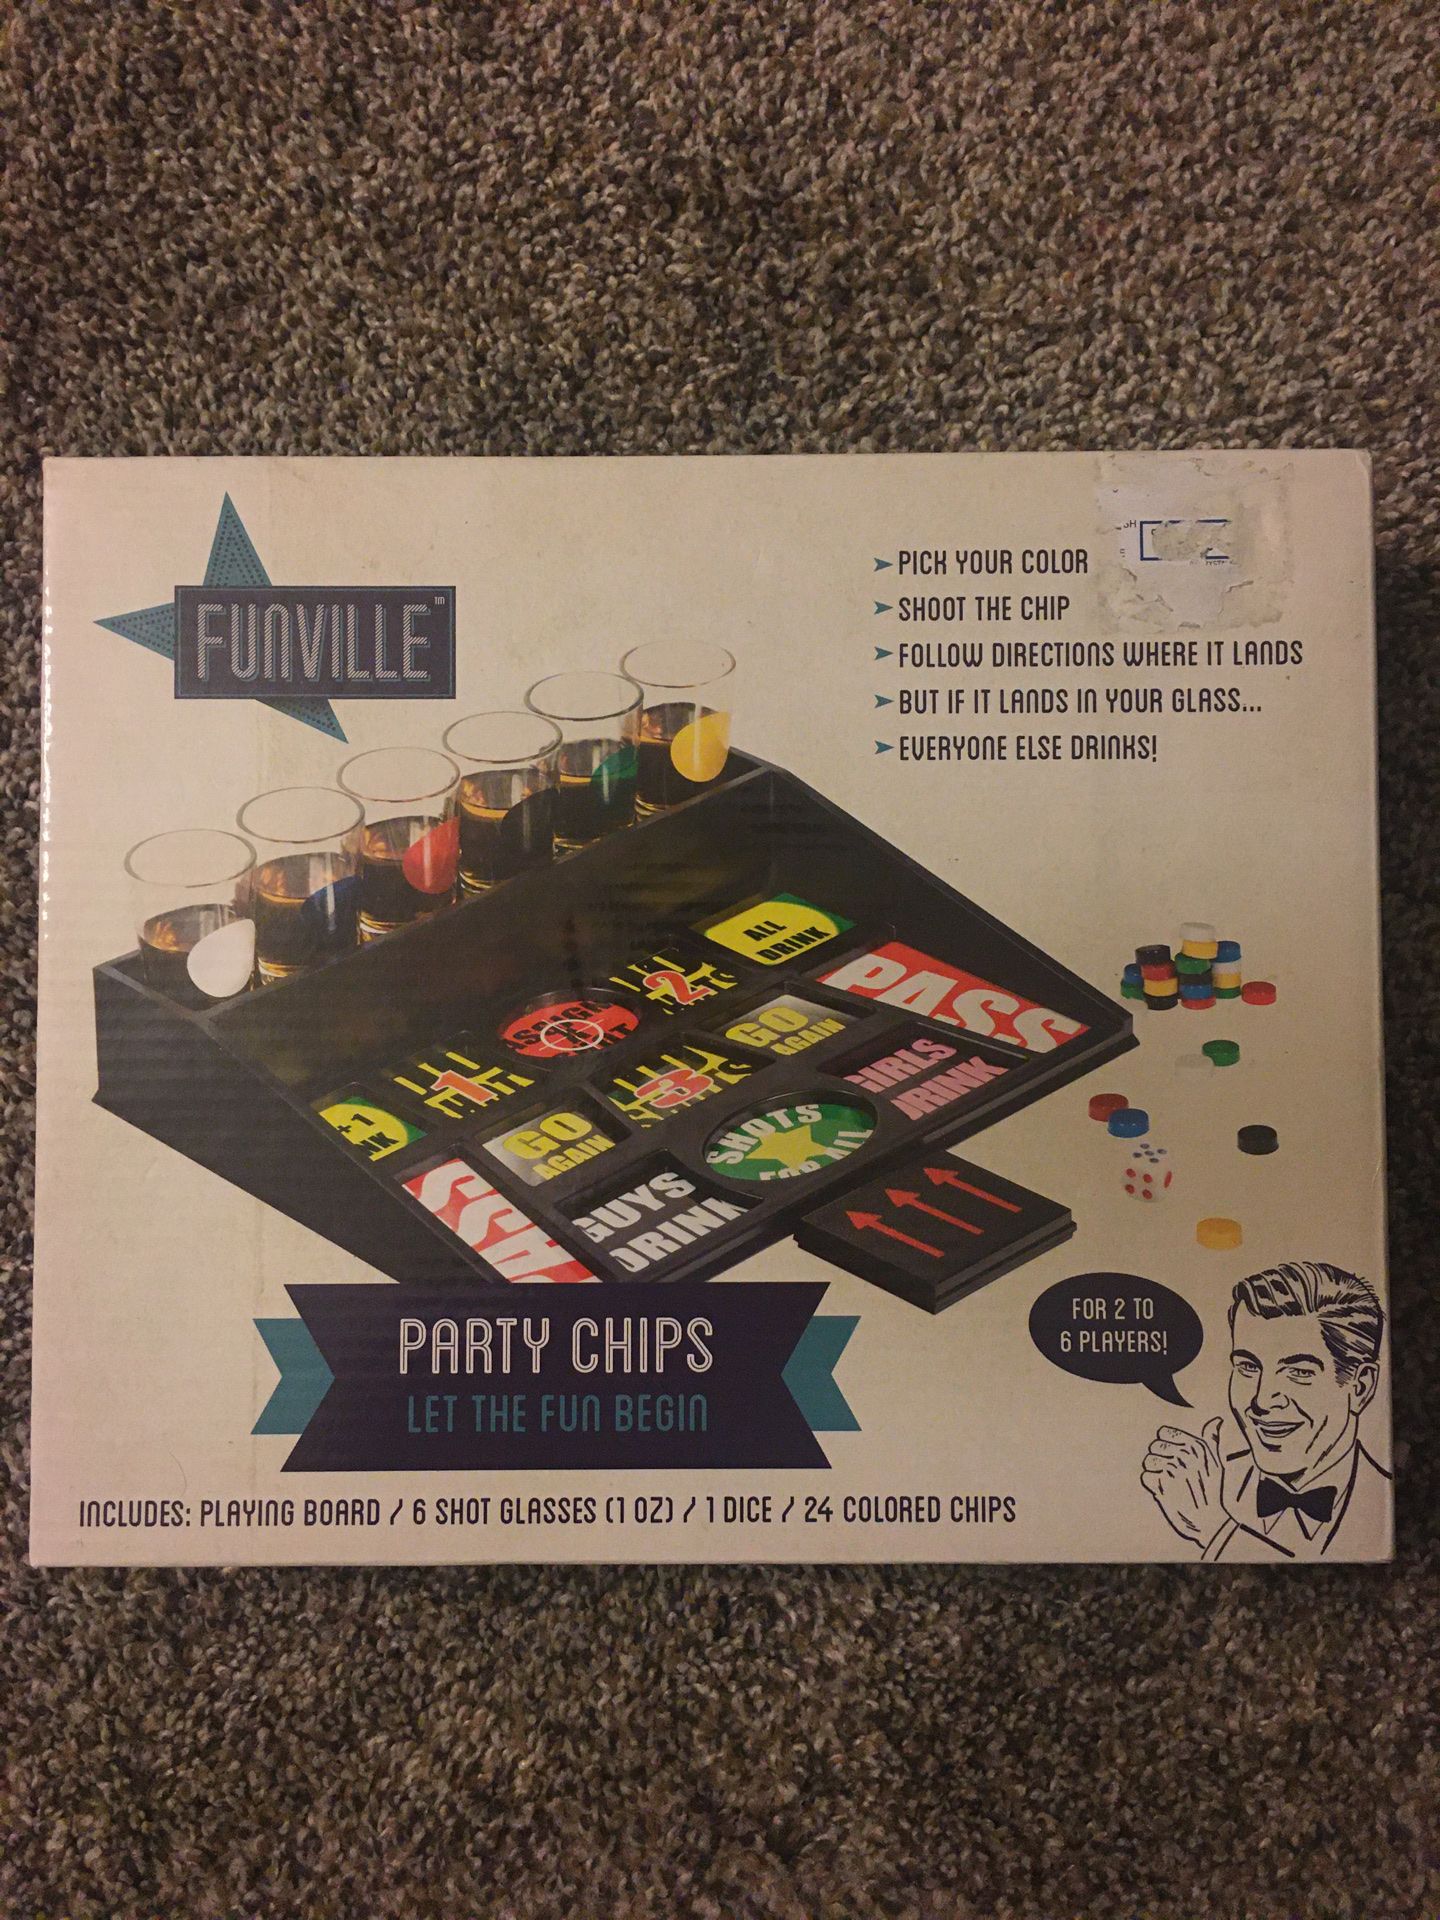 Funville Party Chips - Perfect drinking game